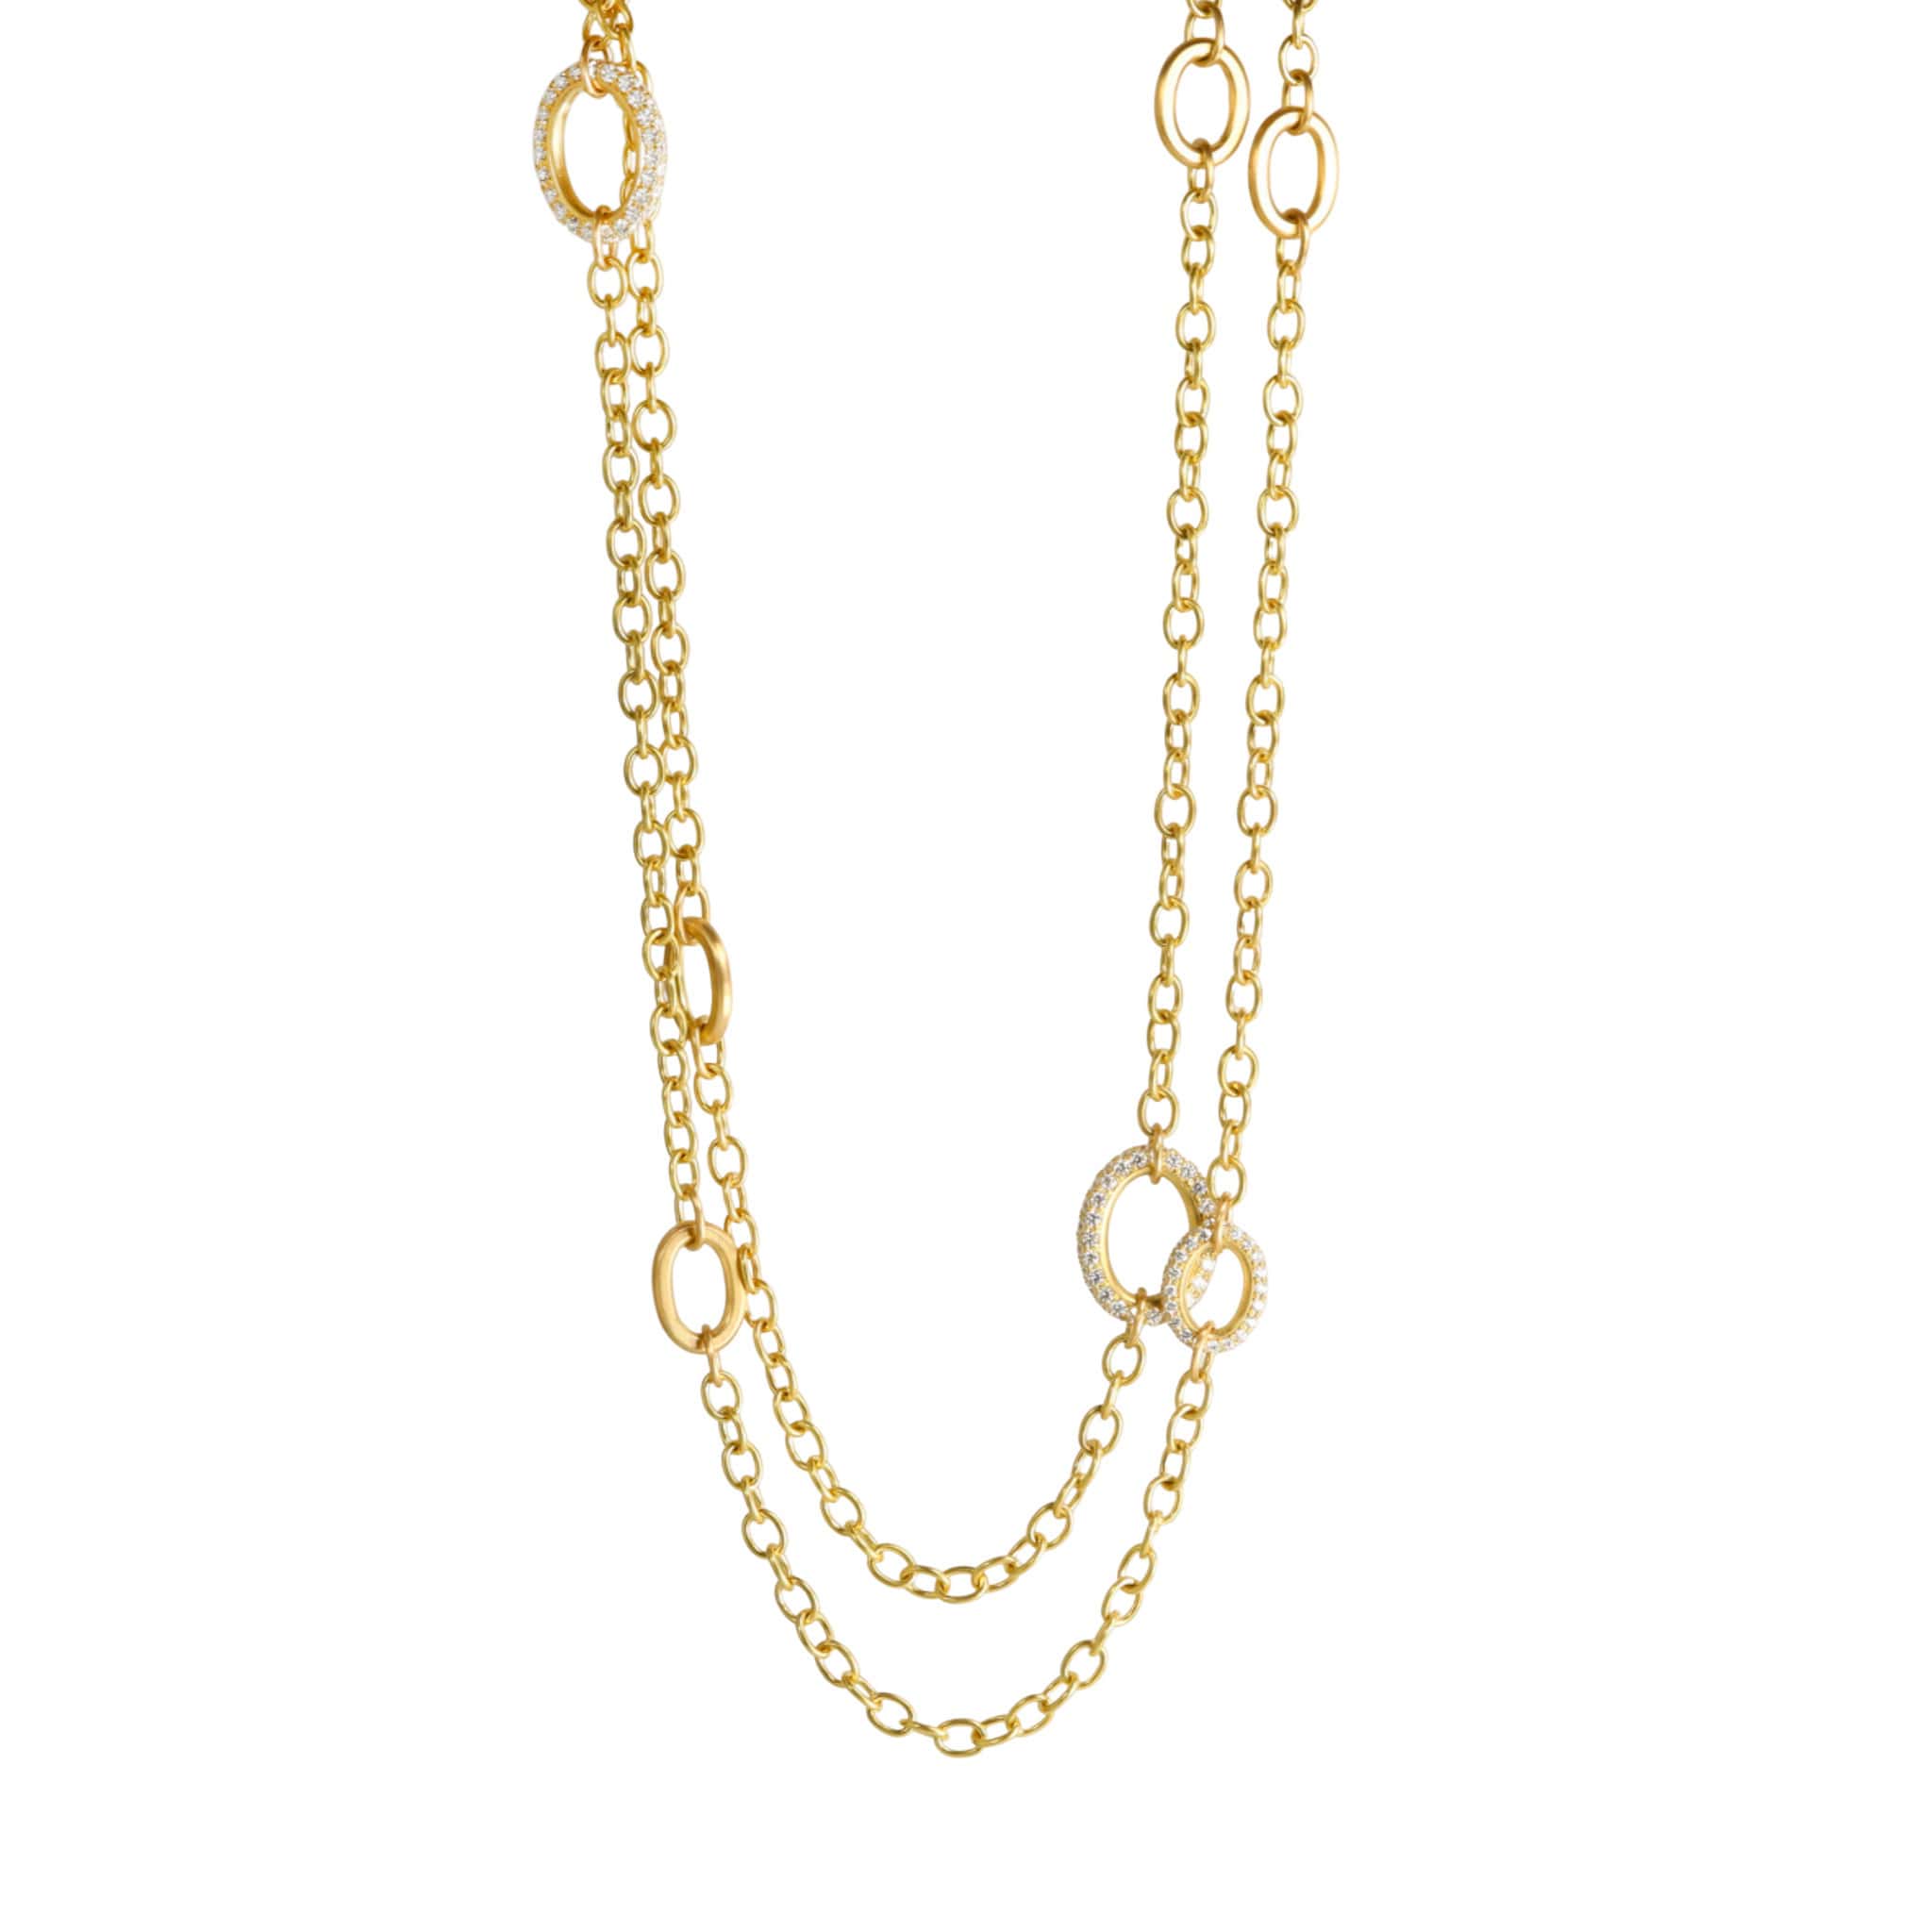 20K Gold Handmade Chain Station Necklace with 8 Varied Gold and Pave Diamond Links - Peridot Fine Jewelry - Caroline Ellen